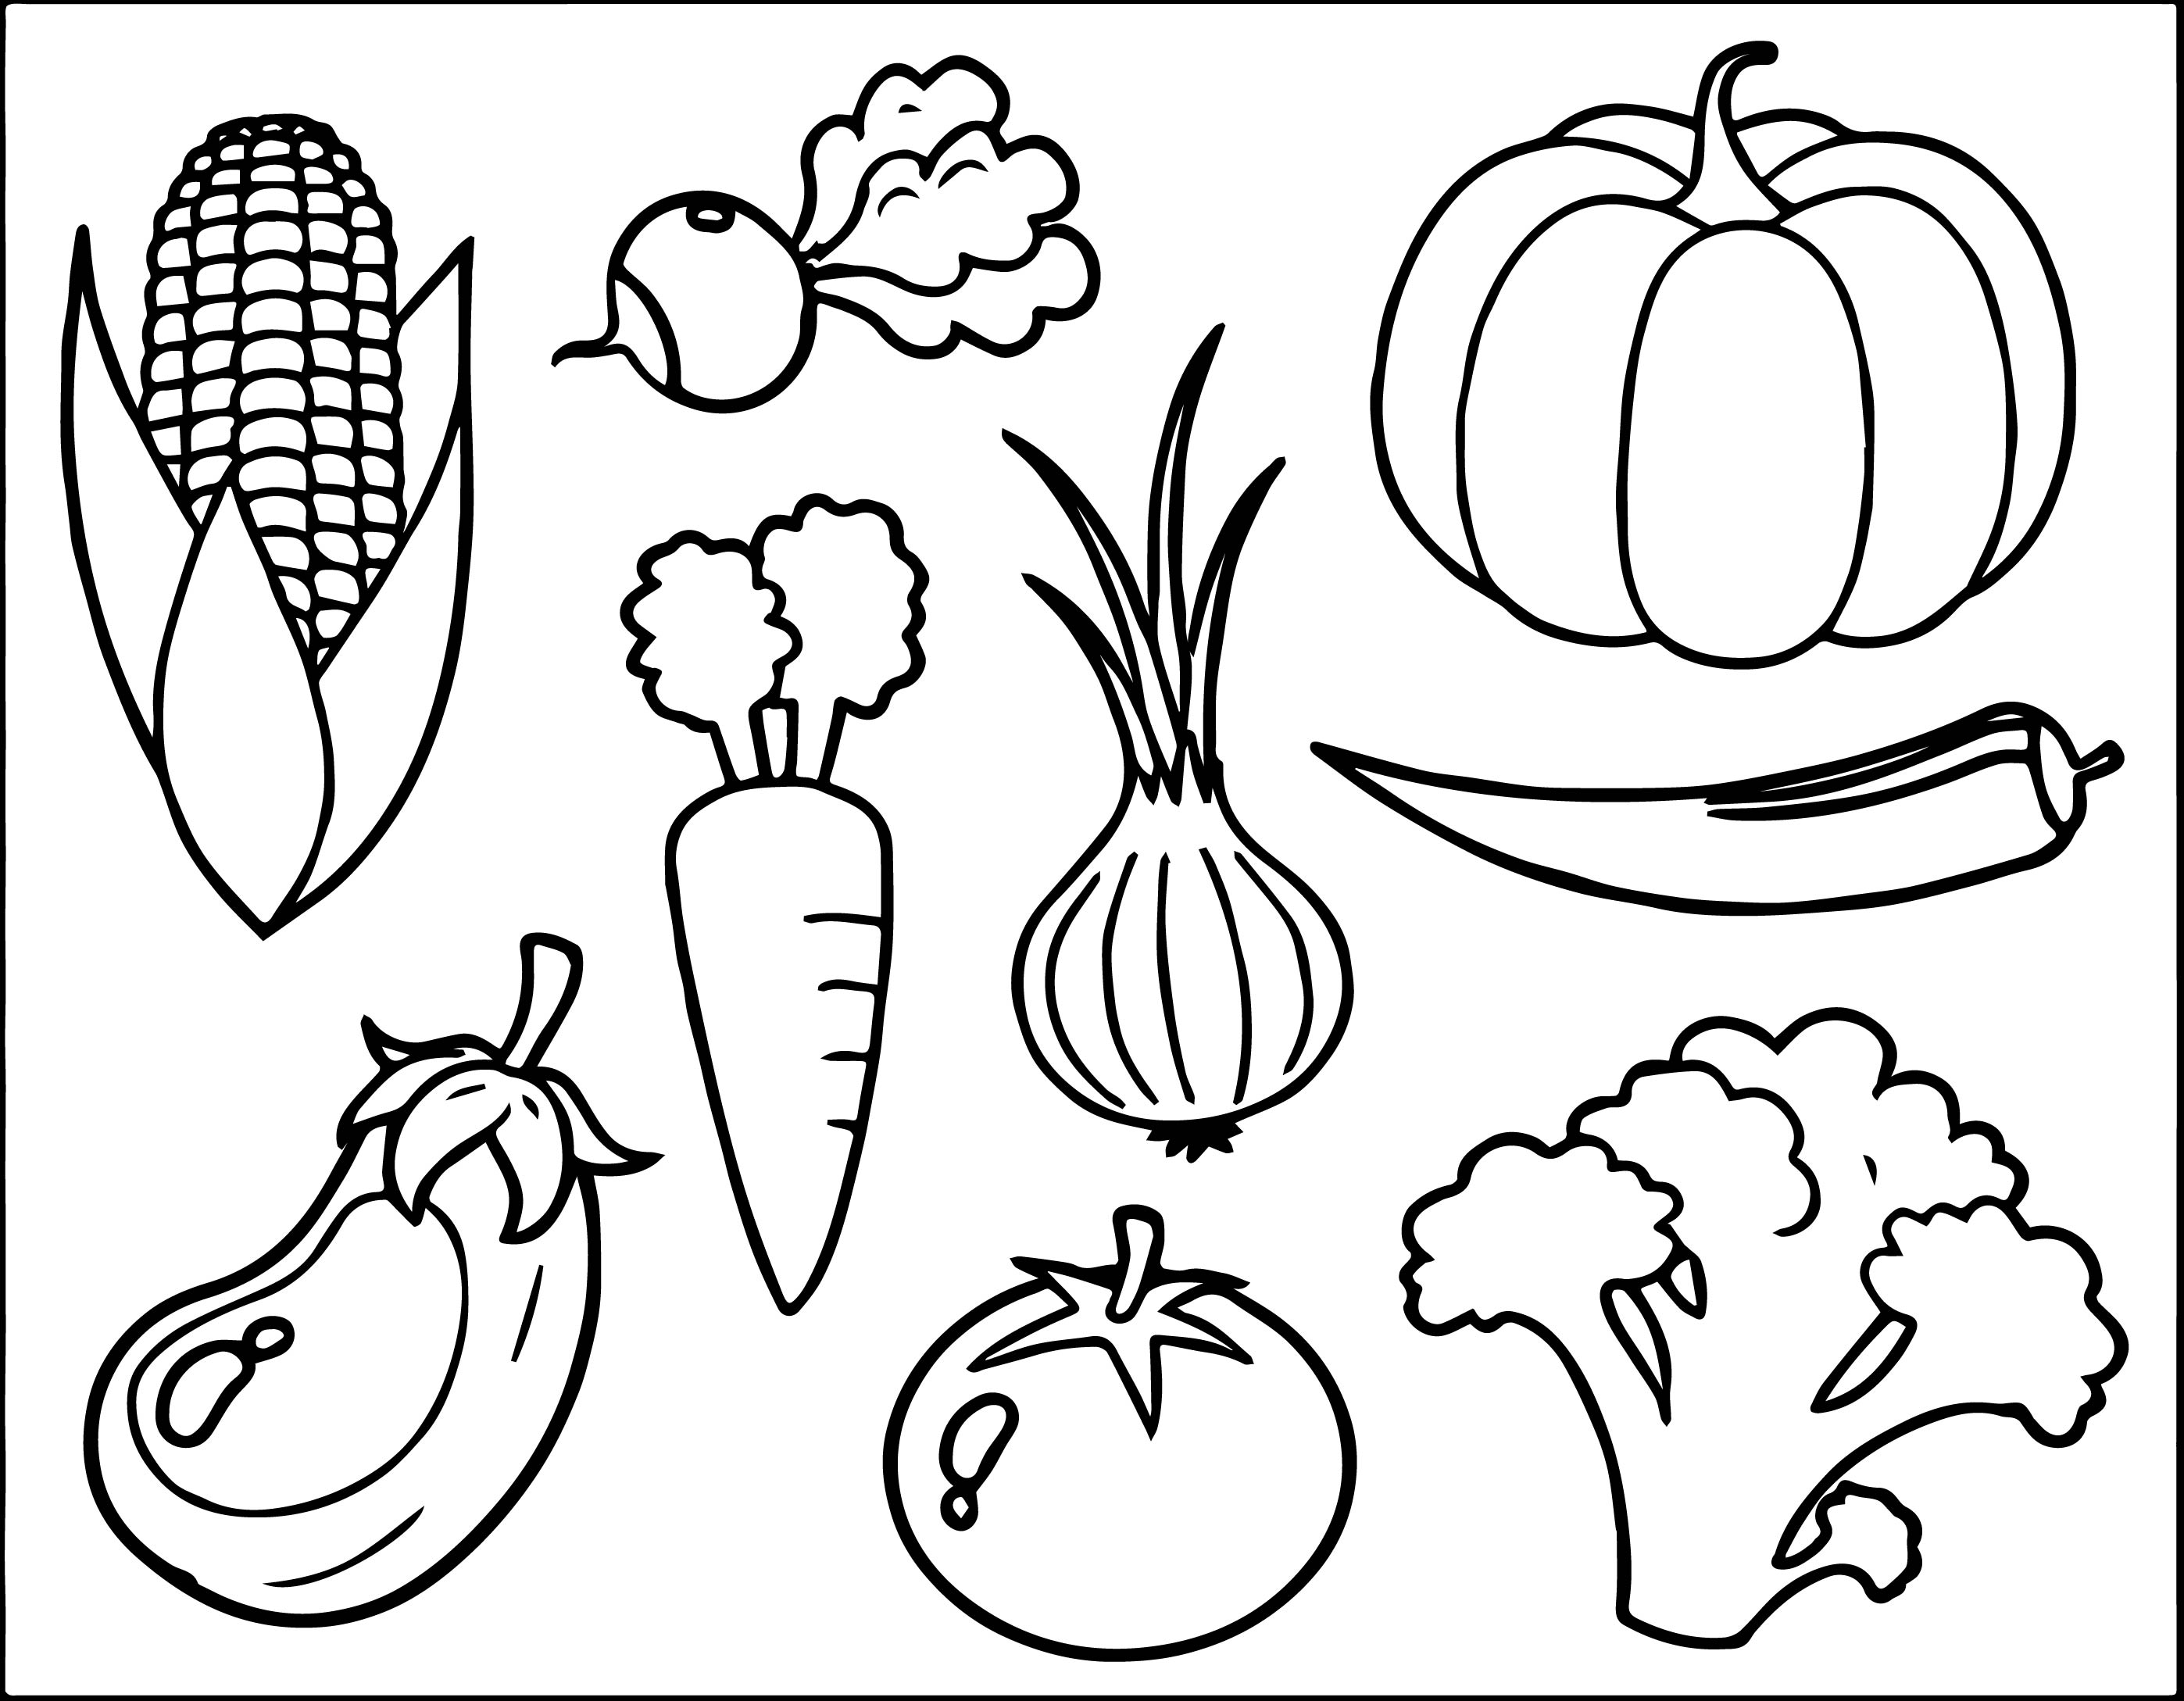 Printable Vegetable Coloring Pages - Printable Blank World